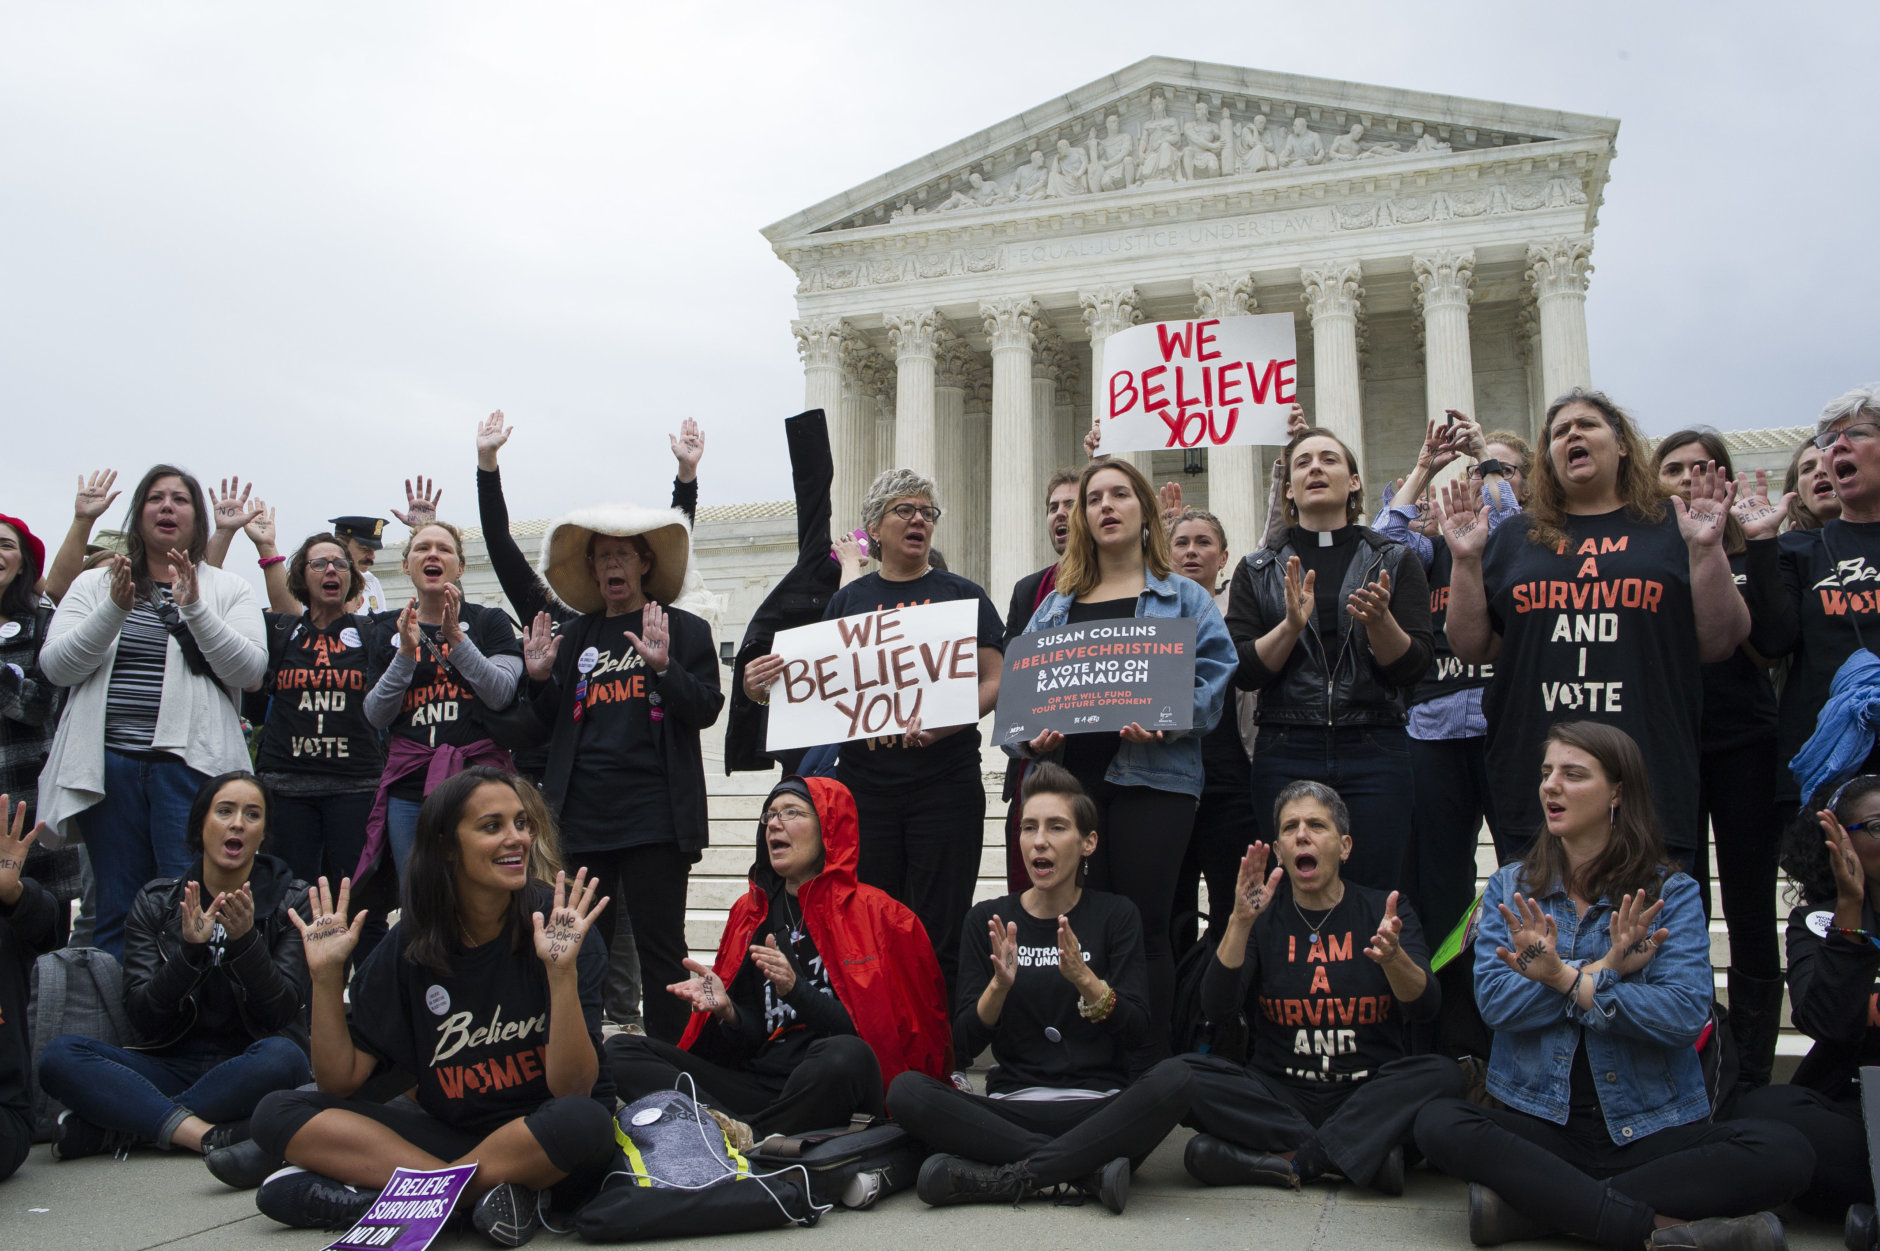 Women supporters of Christine Blasey Ford demonstrate in front of the Supreme Court in Washington, Thursday, Sept. 27, 2018. The Senate Judiciary Committee will hold a hearing today with Supreme Court Nominee Brett Kavanaugh and Christine Blasey Ford, the woman who says he sexually assaulted her. (AP Photo/Cliff Owen)